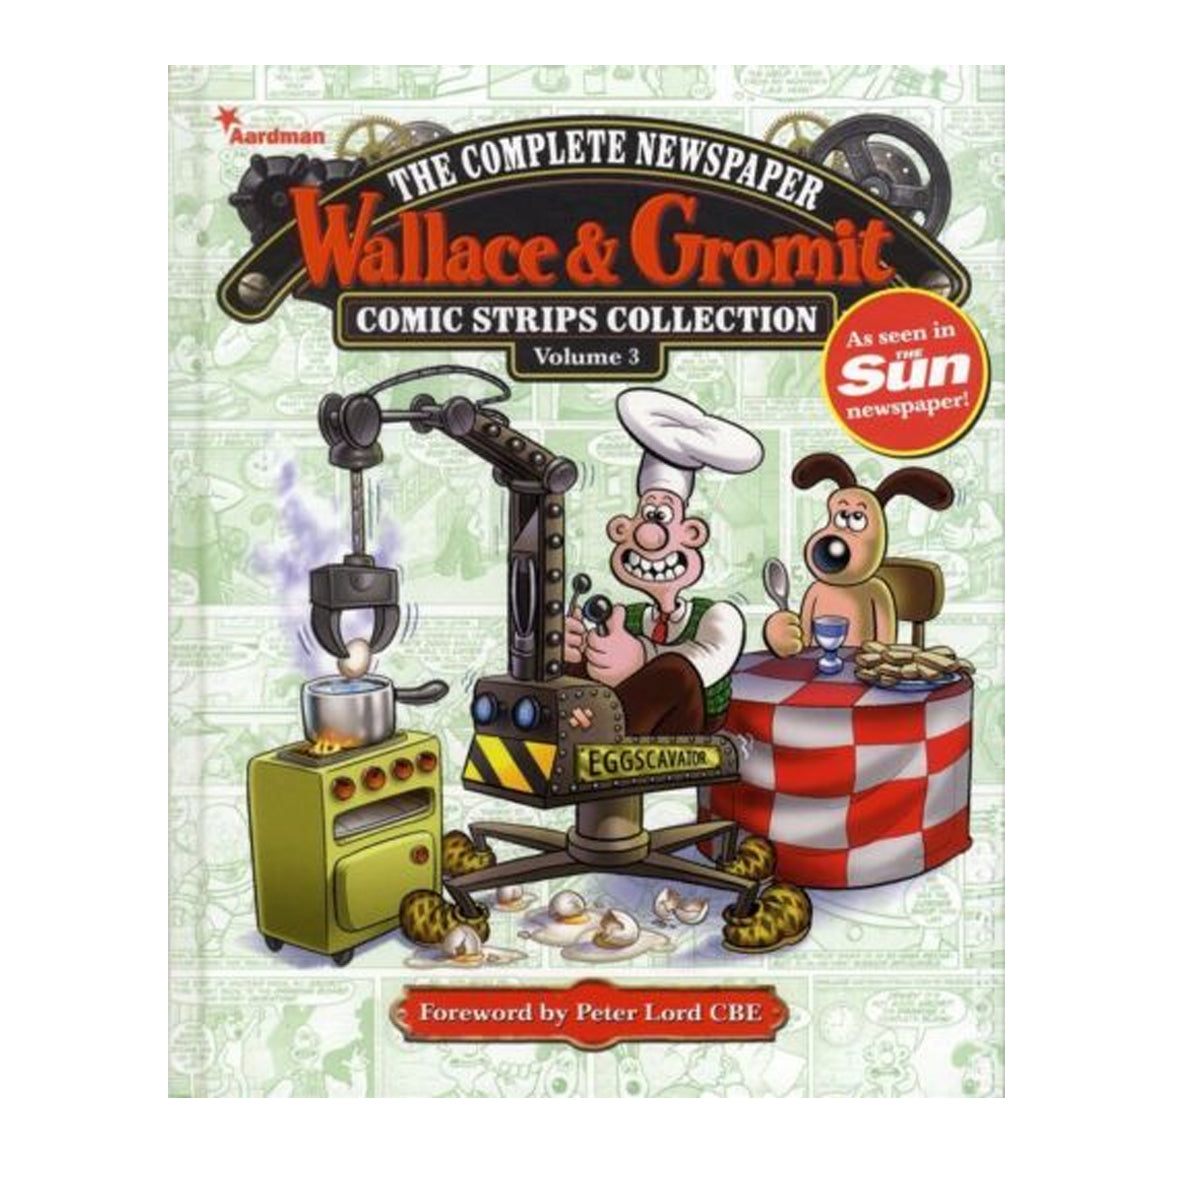 Book - Wallace & Gromit Comic Strips Collection Volume 3